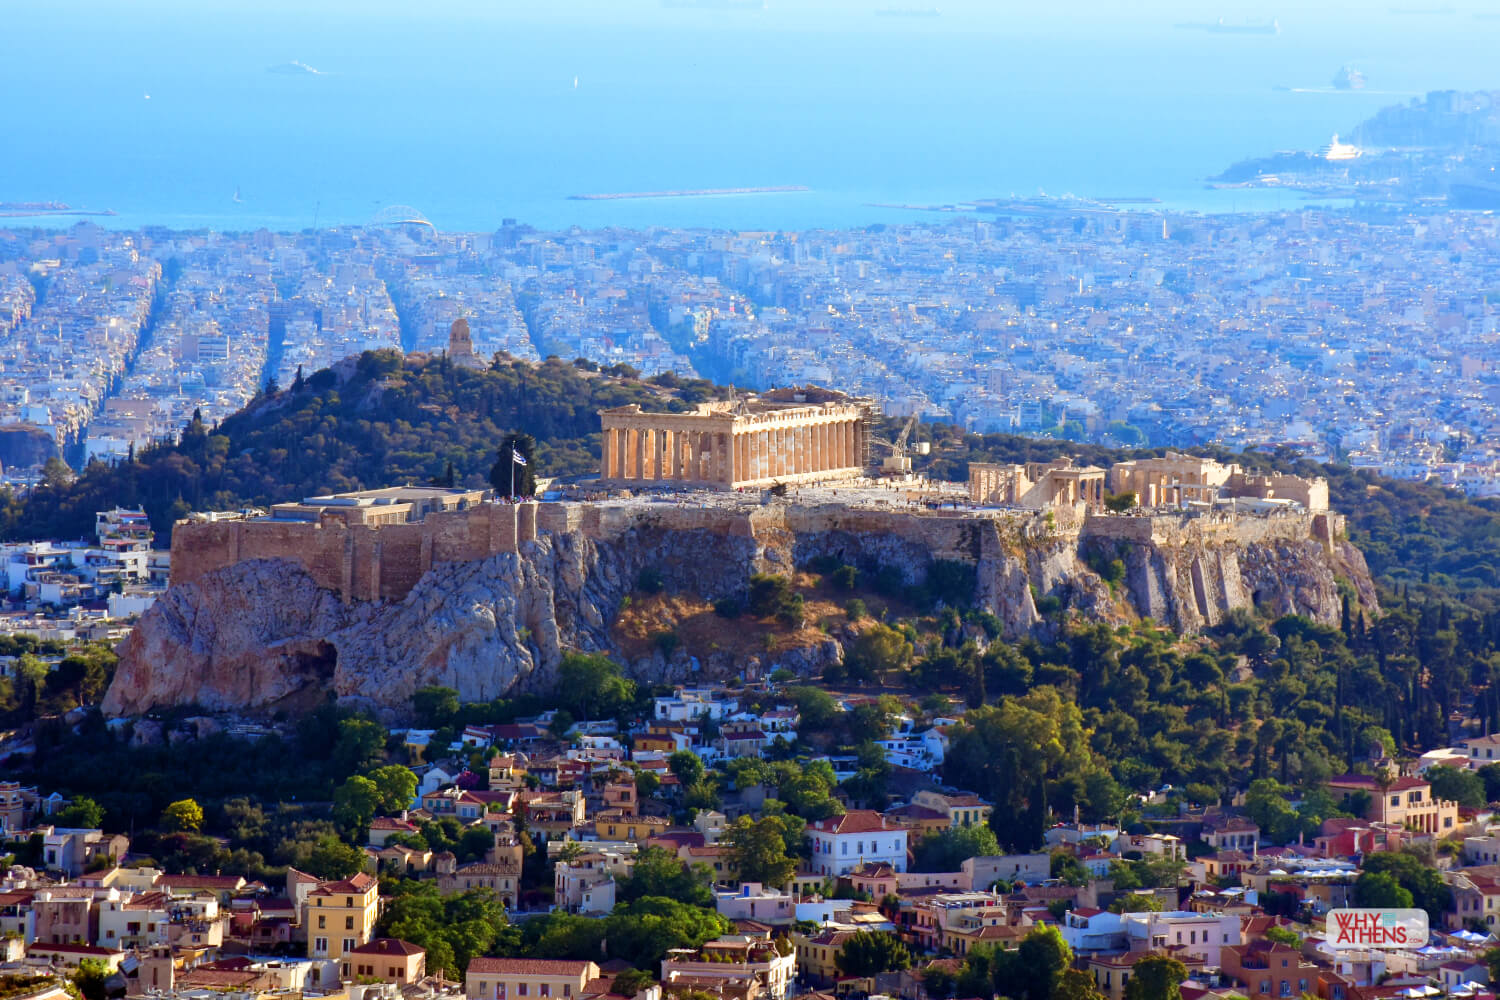 HILLS OF ATHENS - Archaeological journey of Athens' Hills | Why Athens